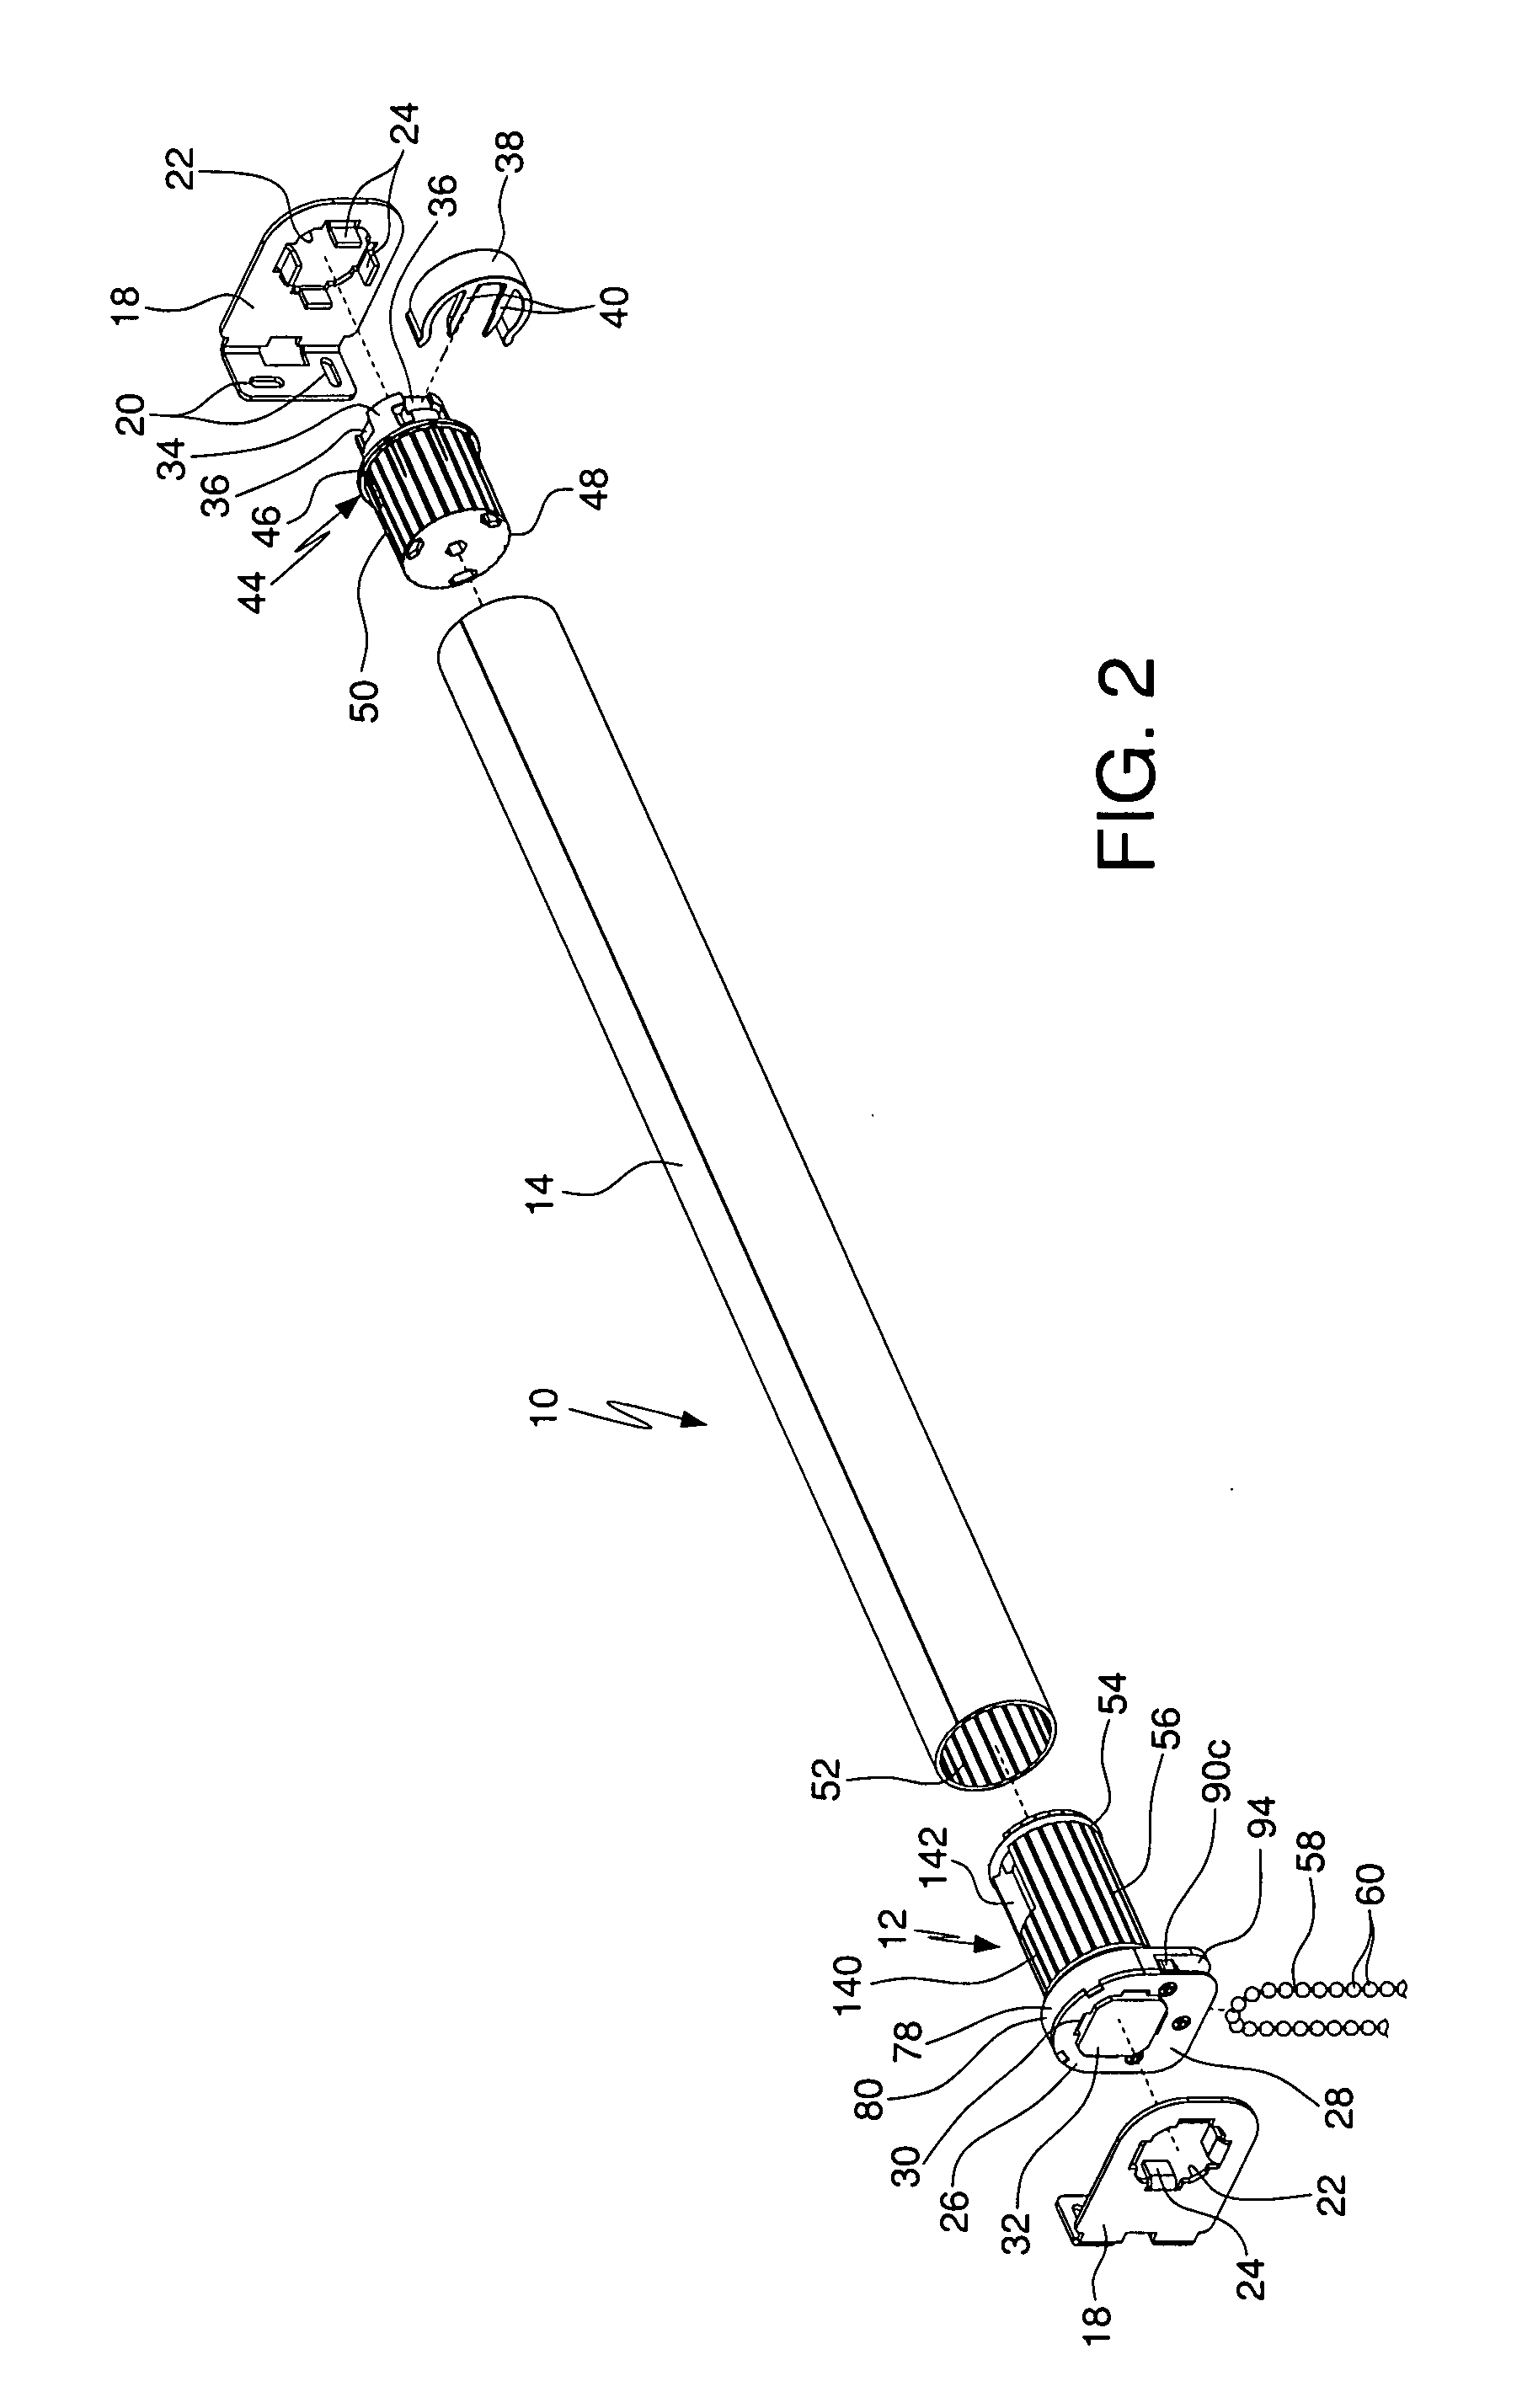 Manual roller shade having clutch mechanism, chain guide and universal mounting